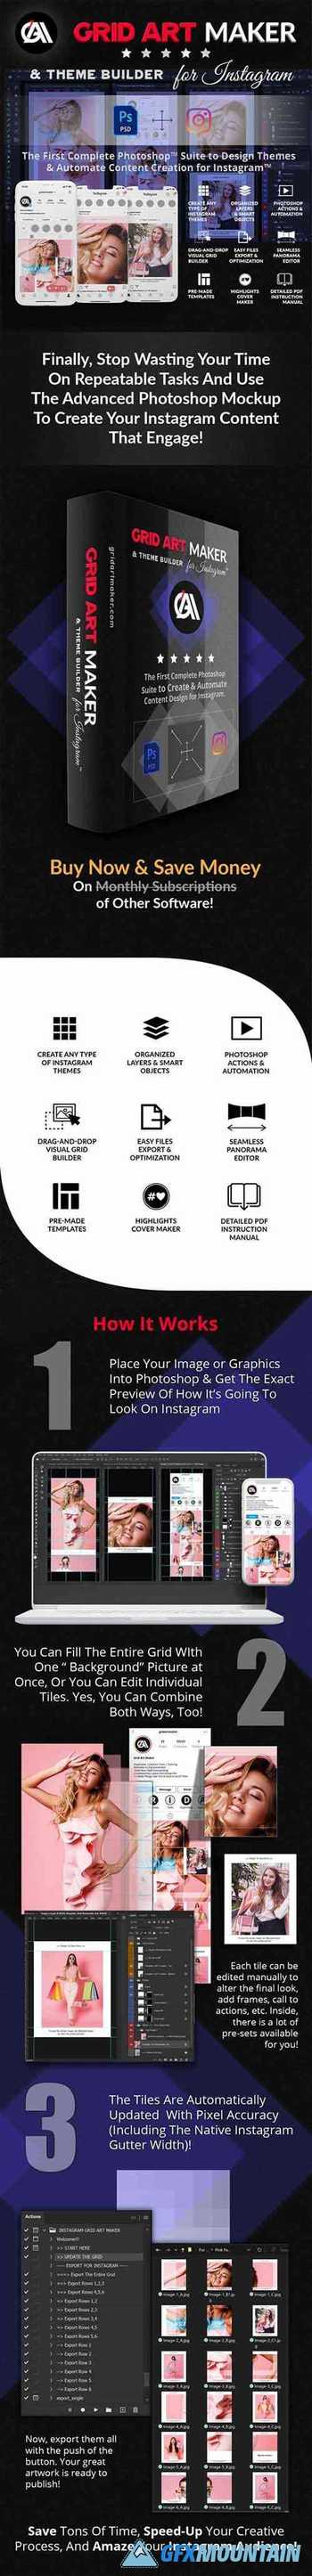 Instagram Grid Art Maker - All-In-One Photoshop Suite 30243603